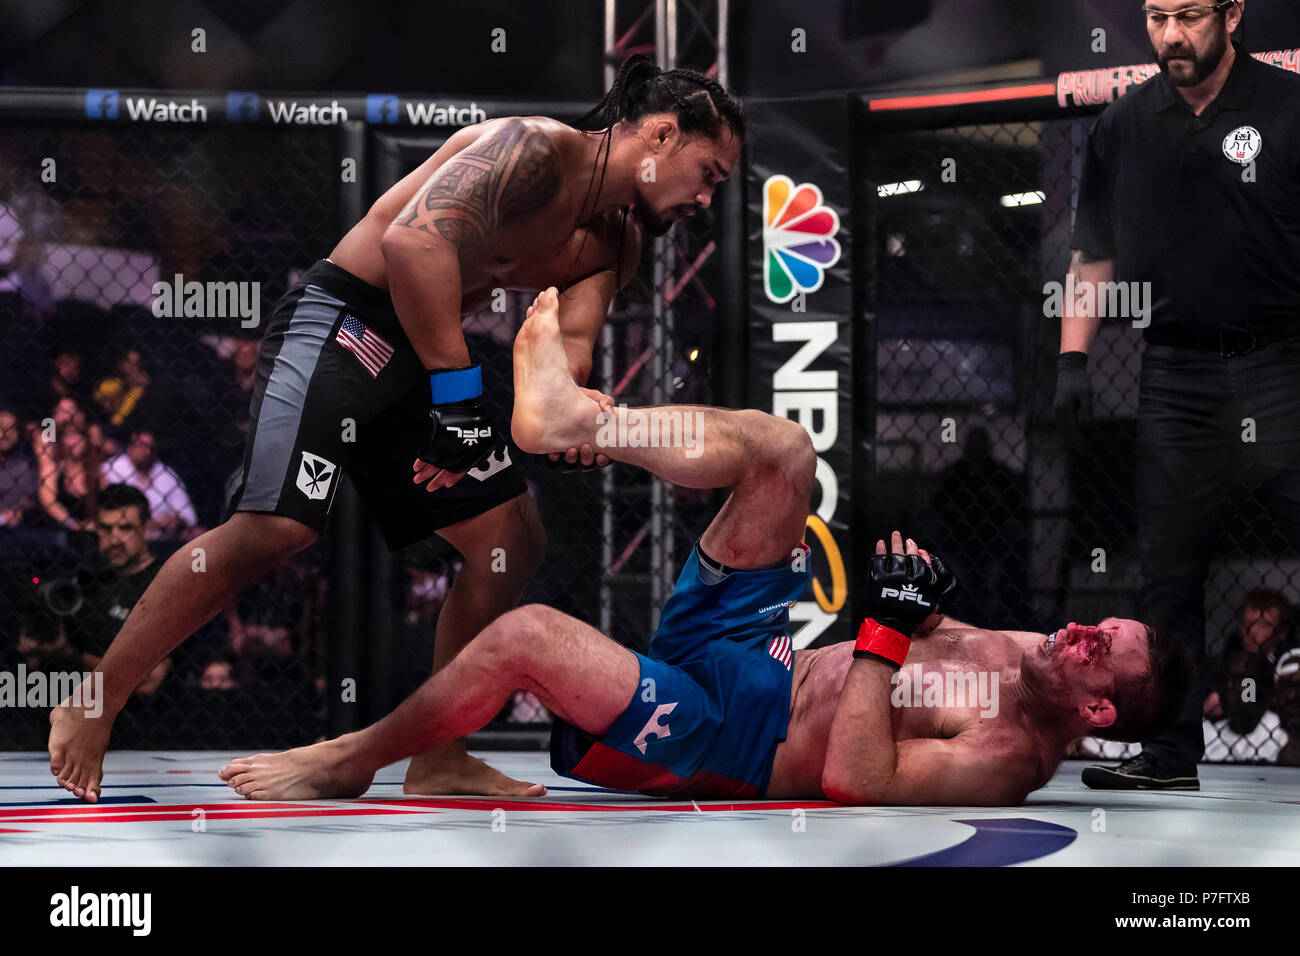 Columbia. 05th July, 2018. Jake Shields and Ray Cooper III in action during their welterweight fight at the Charles E. Smith Center at George Washington University in Washington, District of Columbia. Cooper defeated Shields by TKO. Scott Taetsch/CSM/Alamy Live News Stock Photo